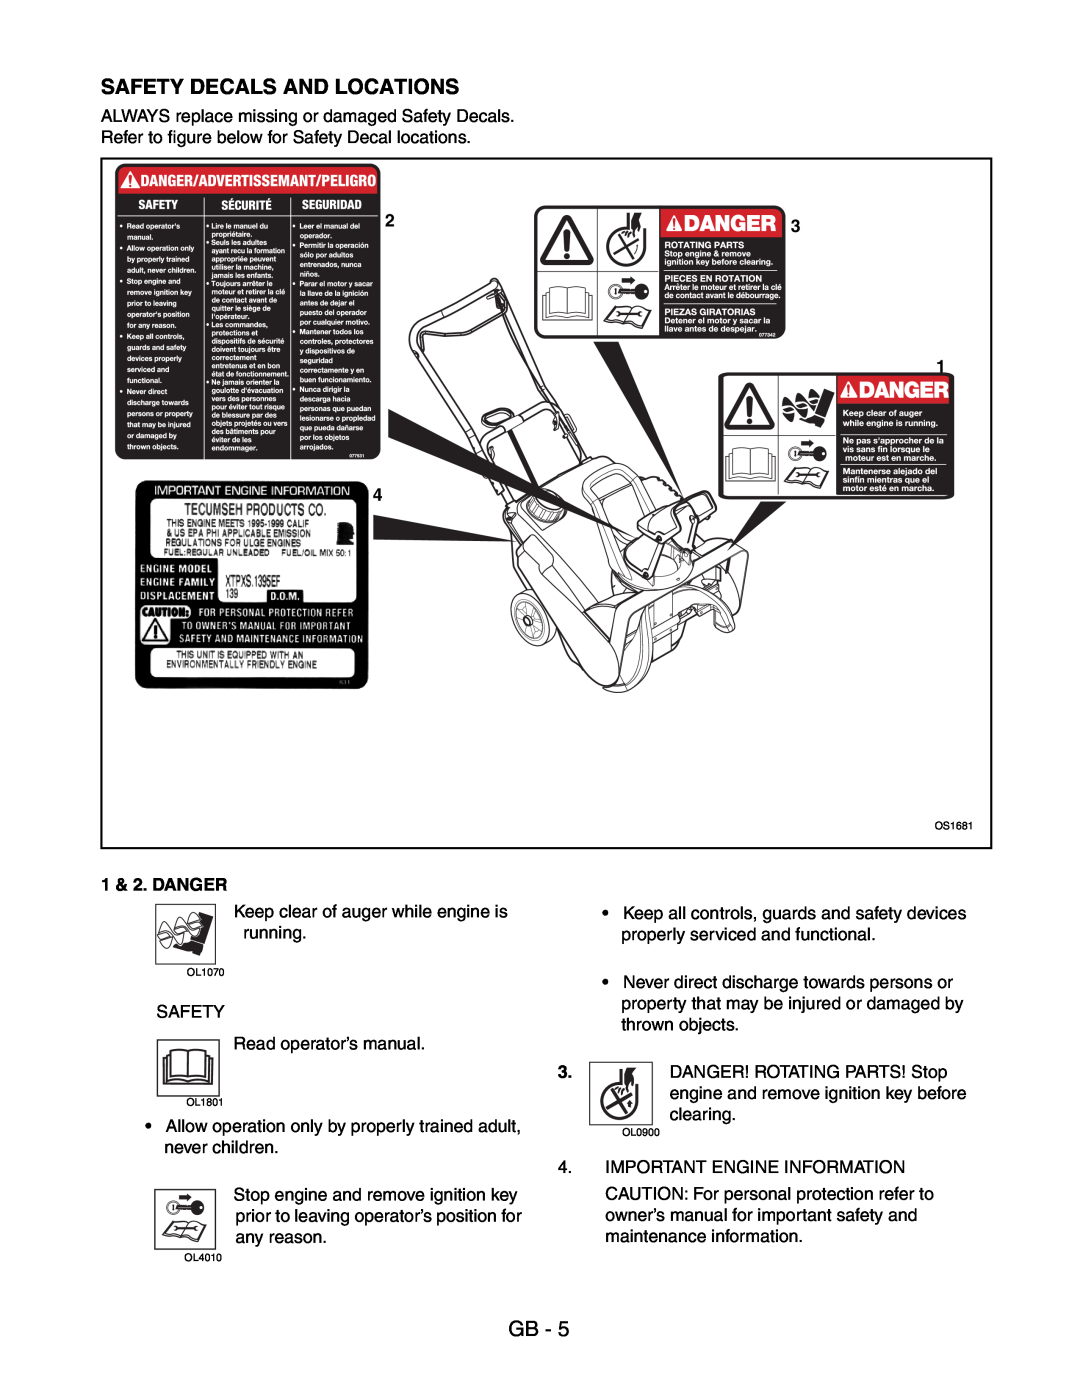 Ariens 938016 - 522 manual Safety Decals And Locations, 1 & 2. DANGER 